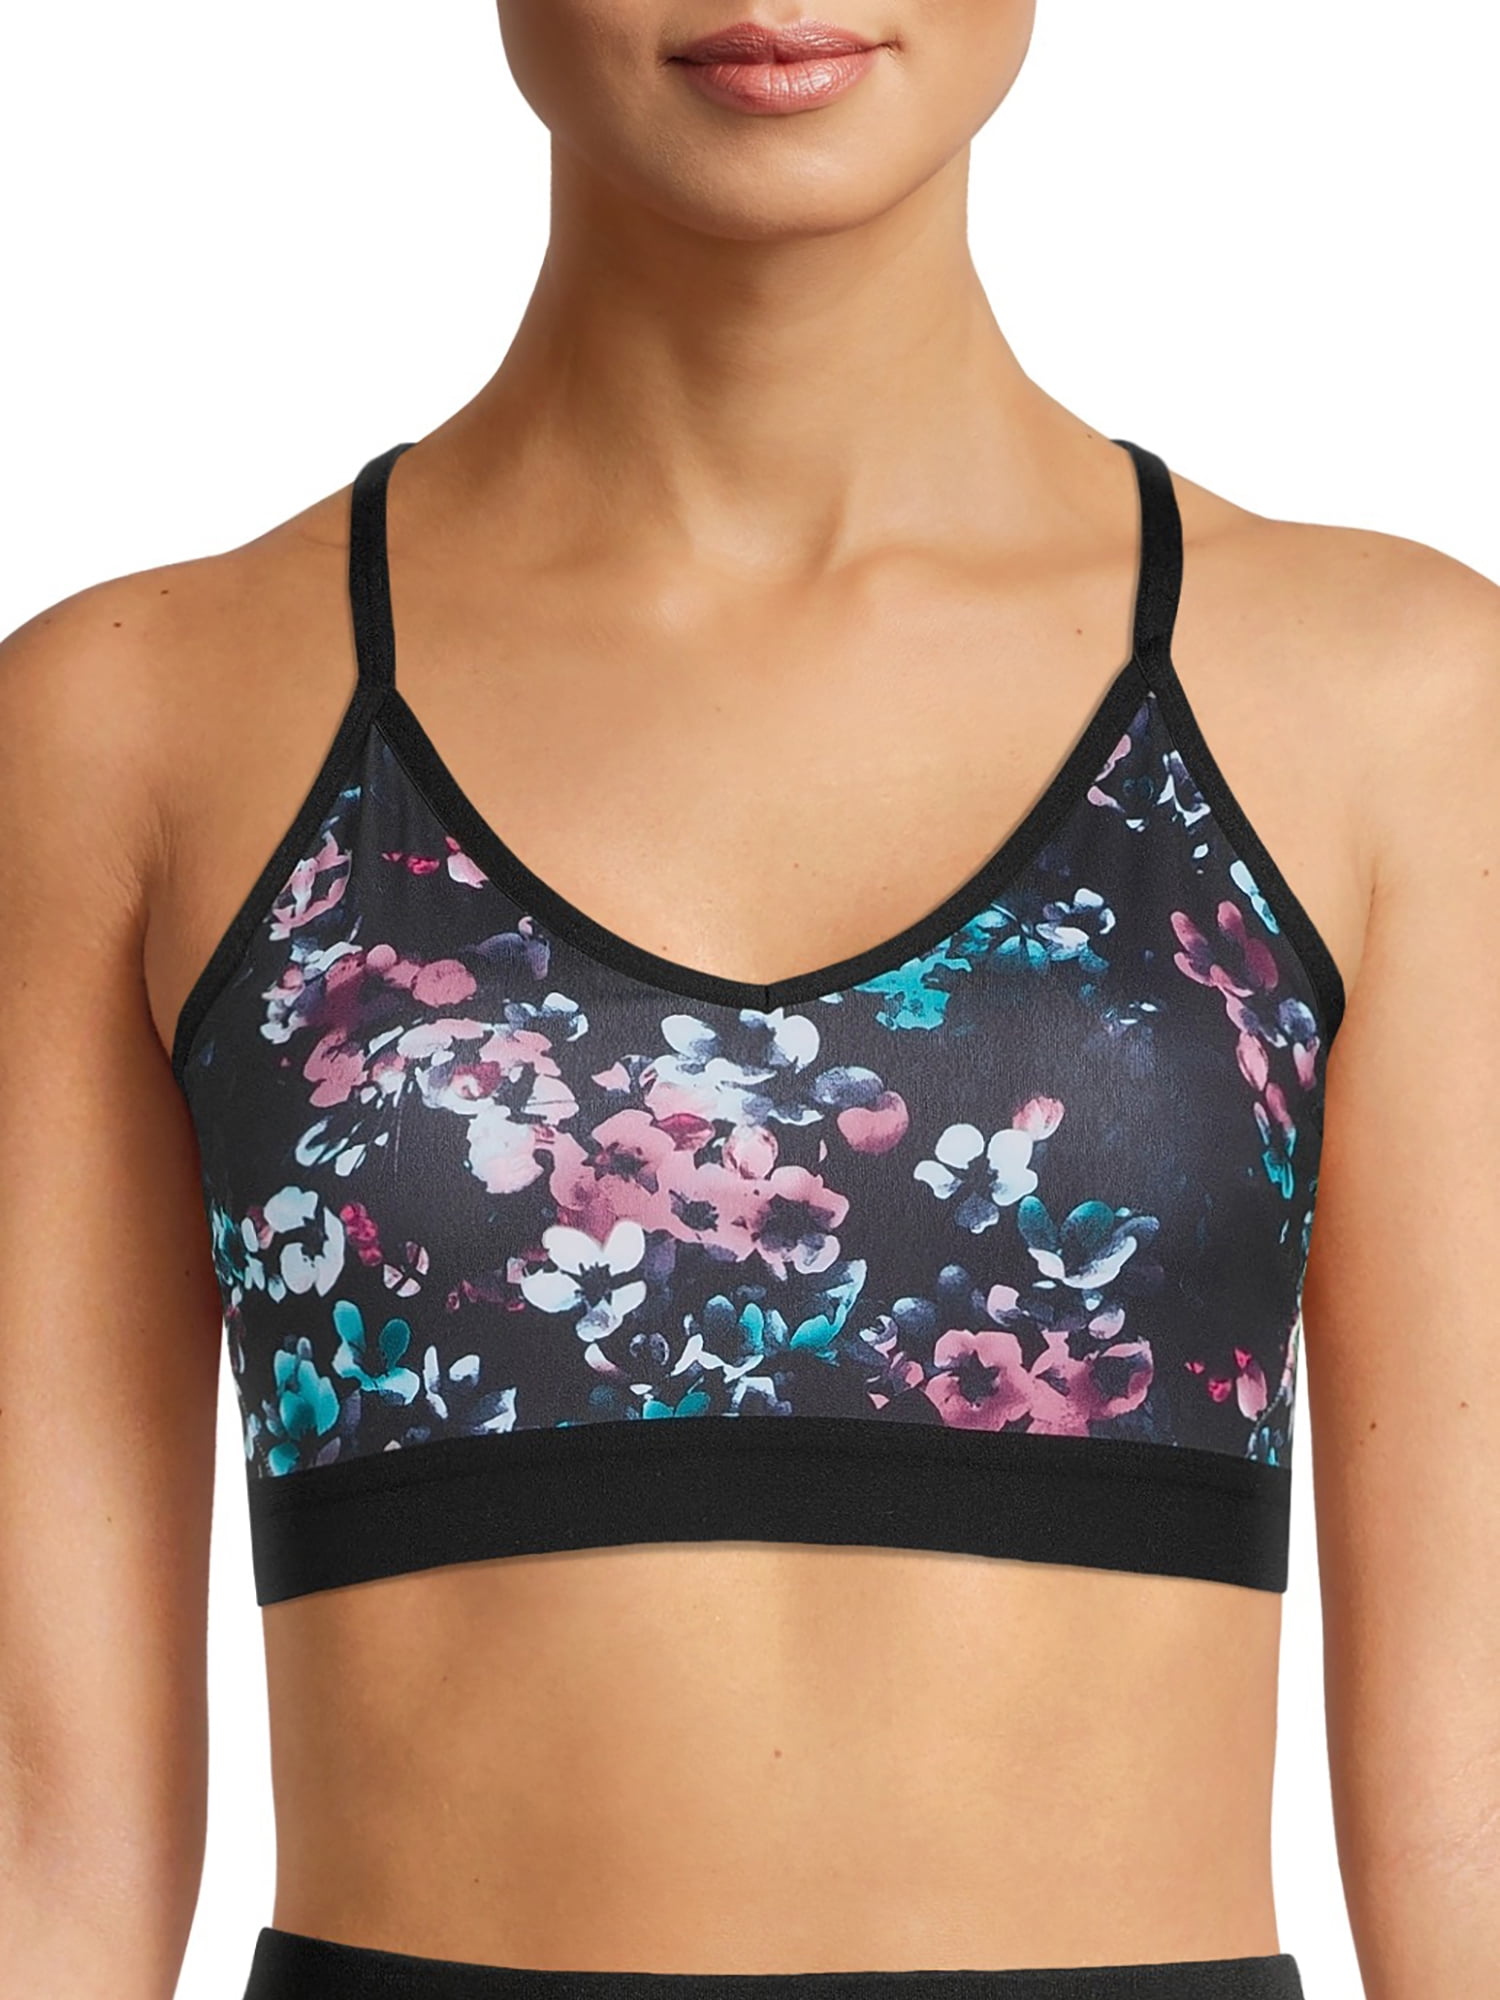 Athletic Works Black Sports Bra - $5 New With Tags - From DaQueenBarbie